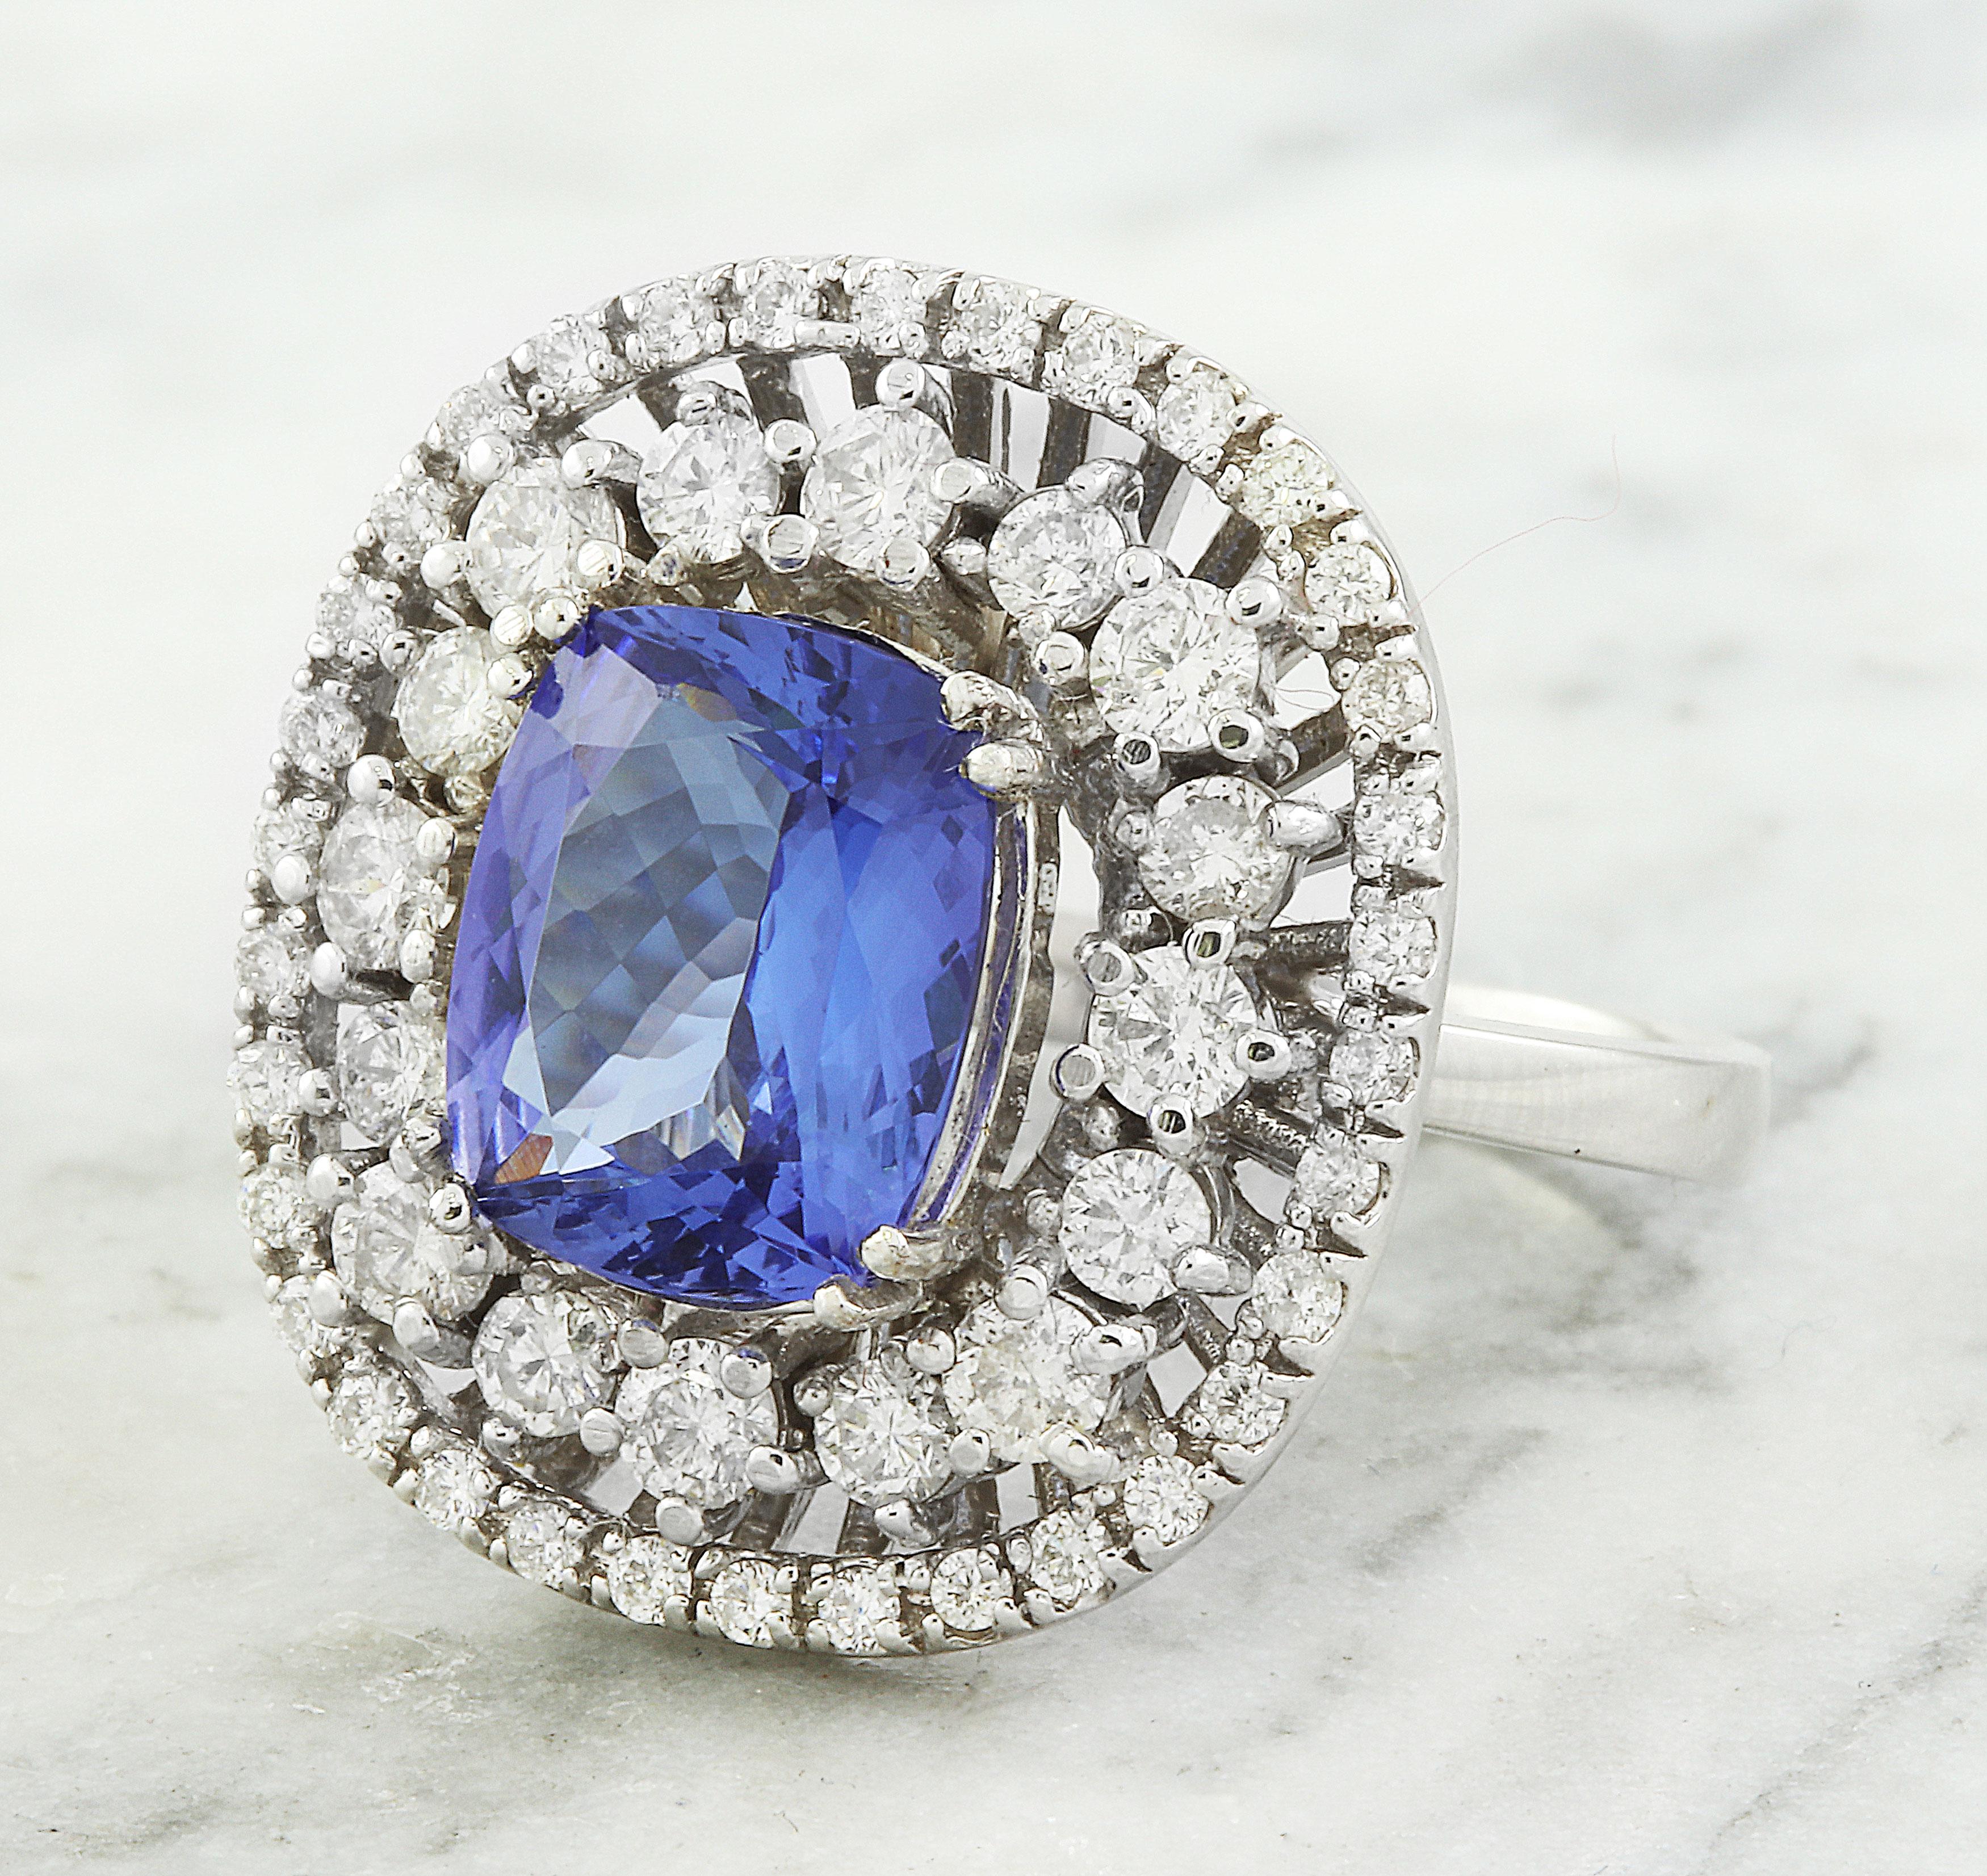 Indulge in luxury with our 5.20 carat natural tanzanite diamond ring in 14K solid white gold. Featuring a striking 4.00 carat tanzanite and 1.20 carats of diamonds, this ring exudes elegance. With a total weight of 7.7 grams and a face measuring